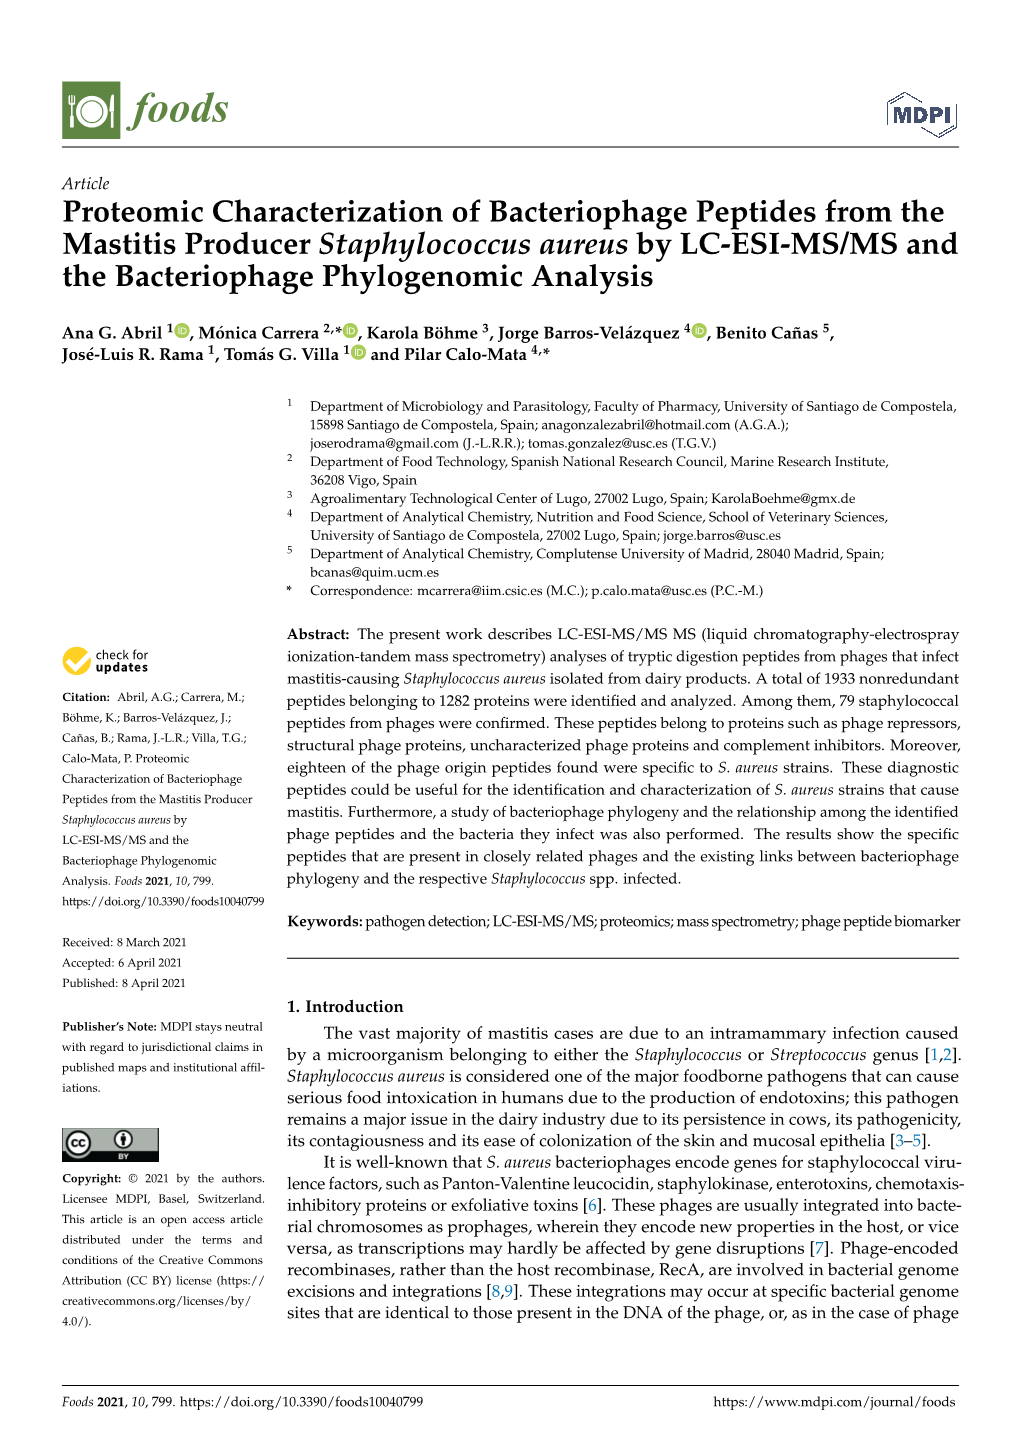 Proteomic Characterization of Bacteriophage Peptides from the Mastitis Producer Staphylococcus Aureus by LC-ESI-MS/MS and the Bacteriophage Phylogenomic Analysis